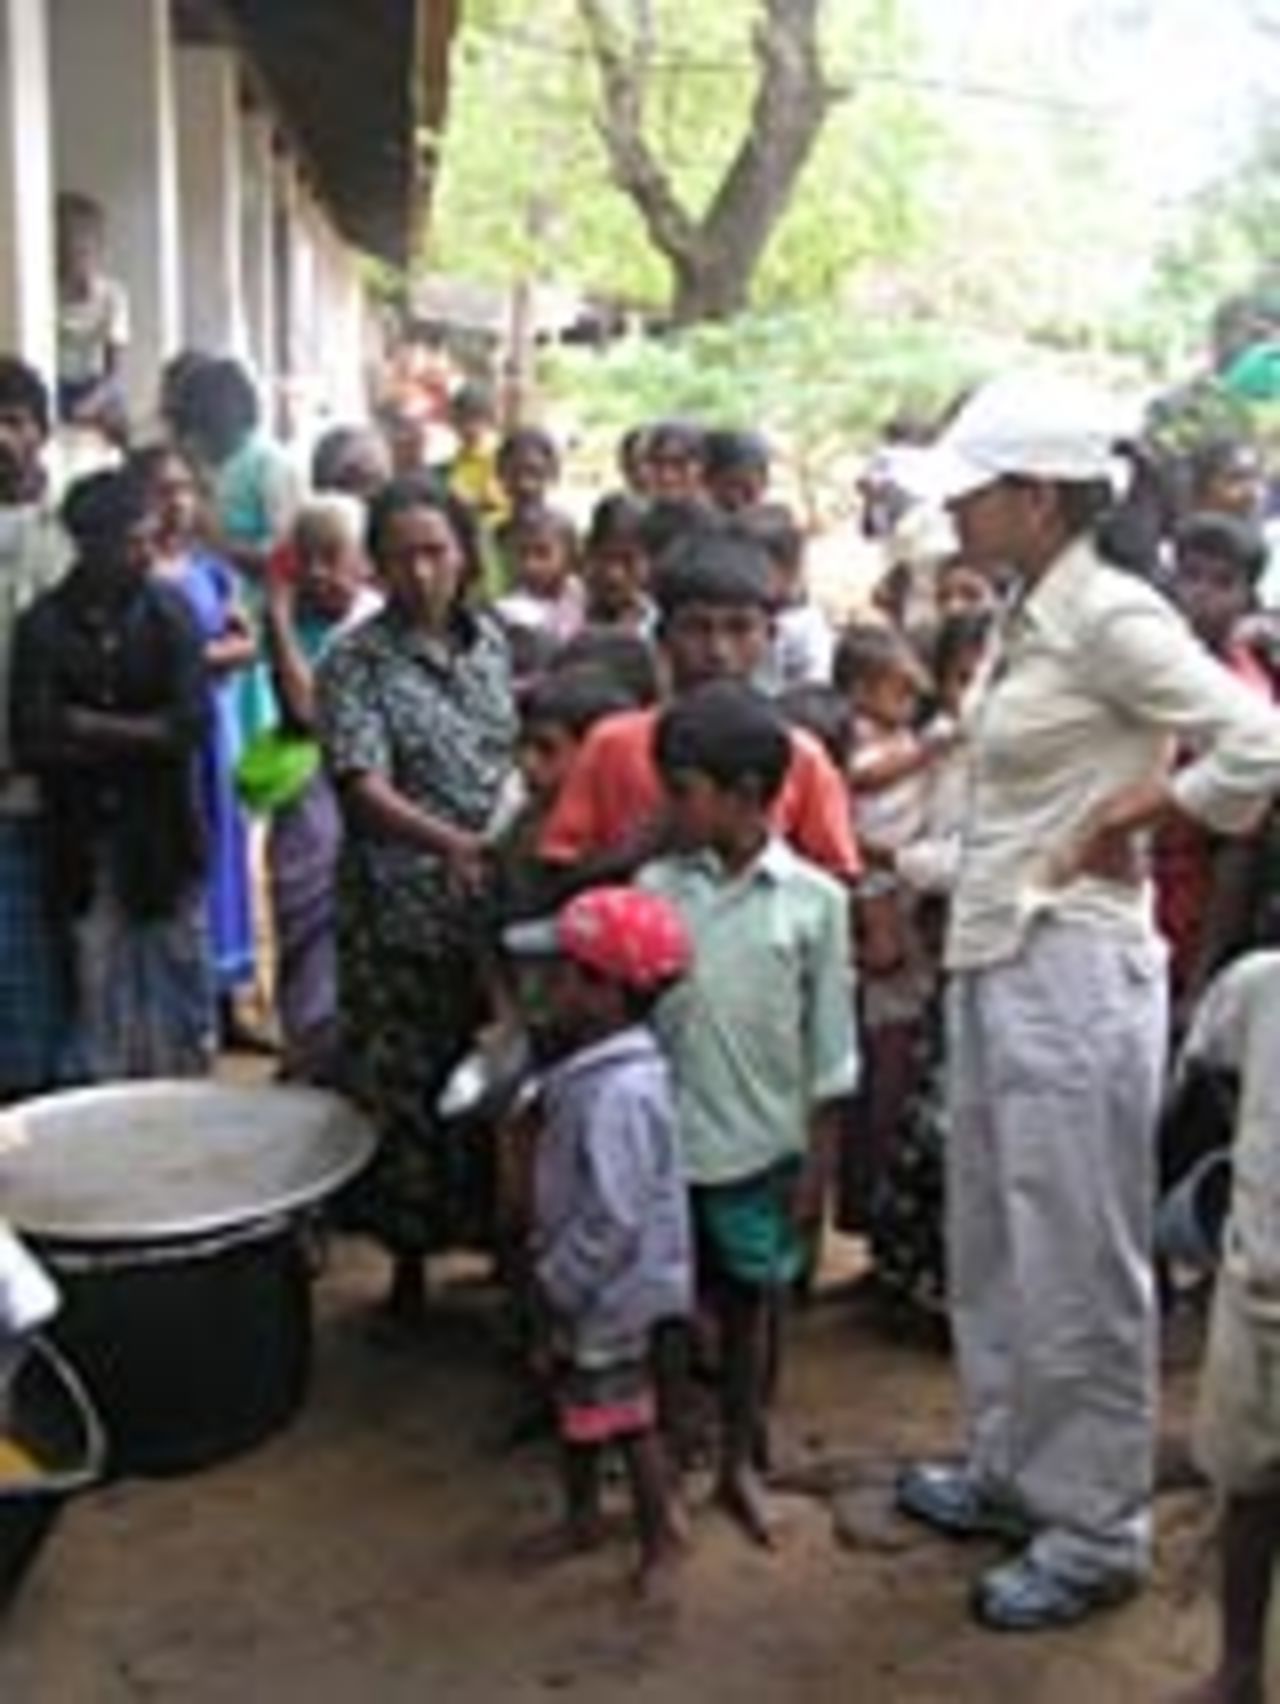 A queue of children waiting for food, January 6, 2005